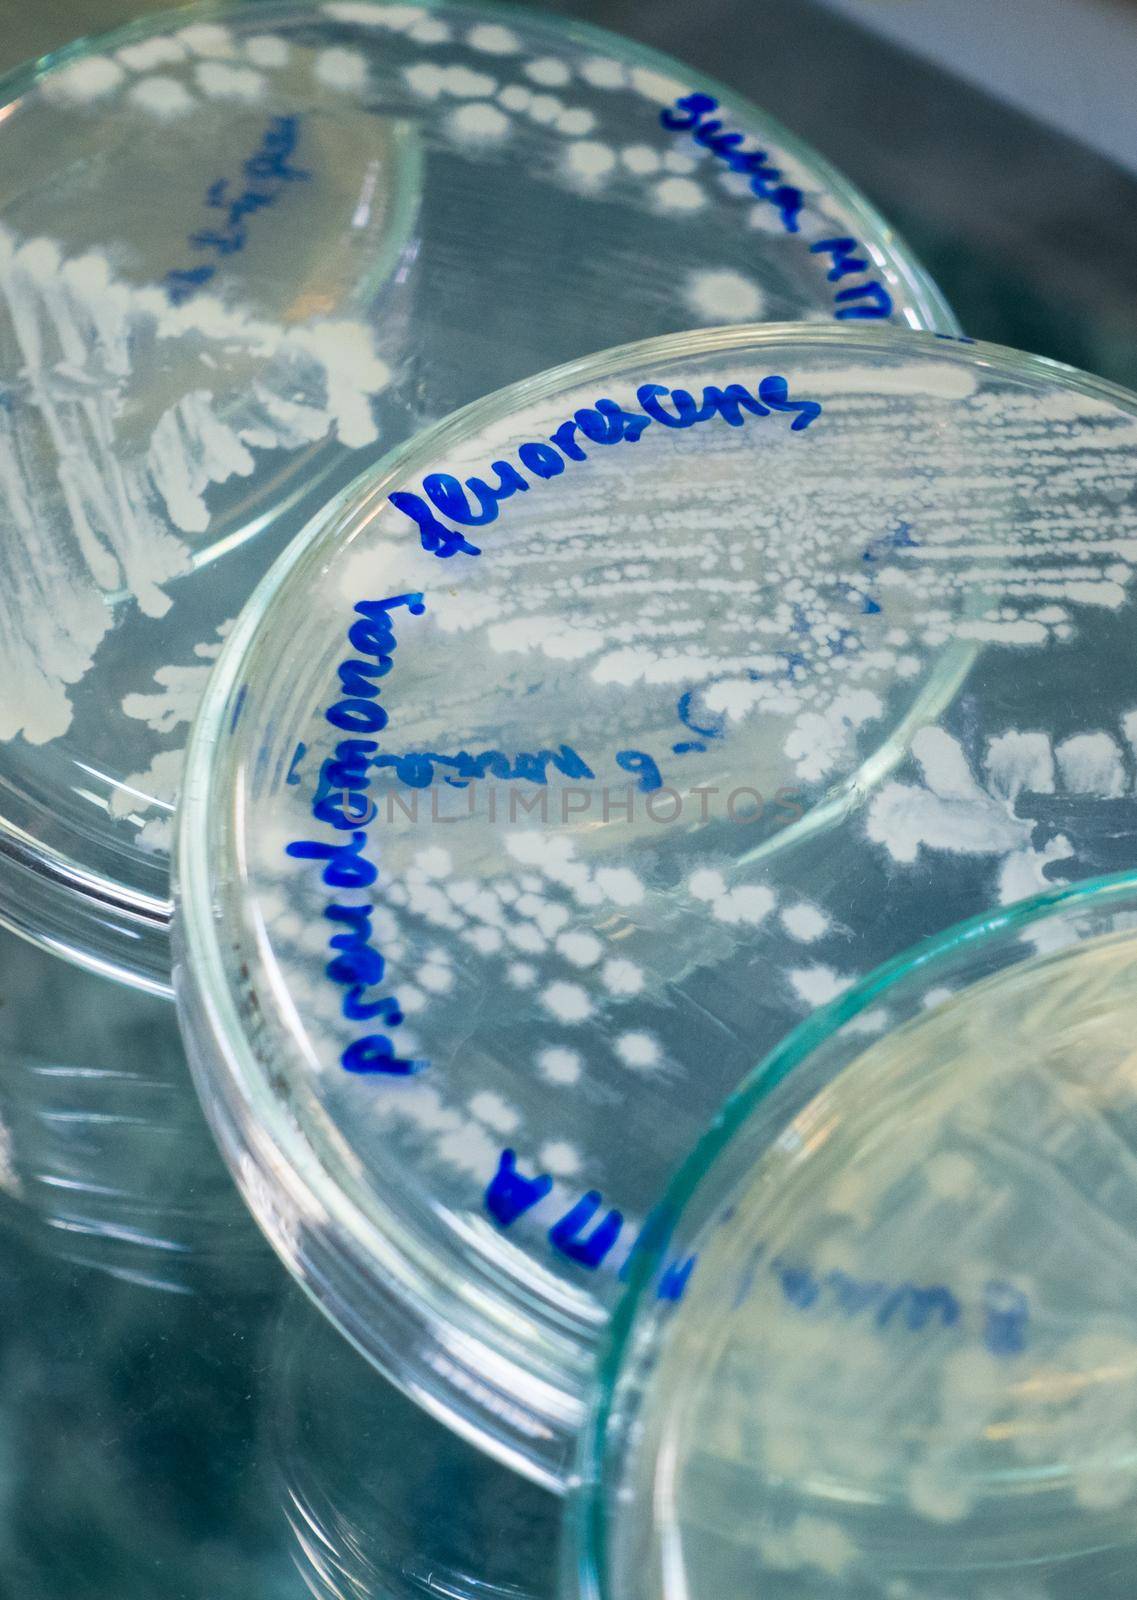 Bacterial cultures for analysis. by Jannetta